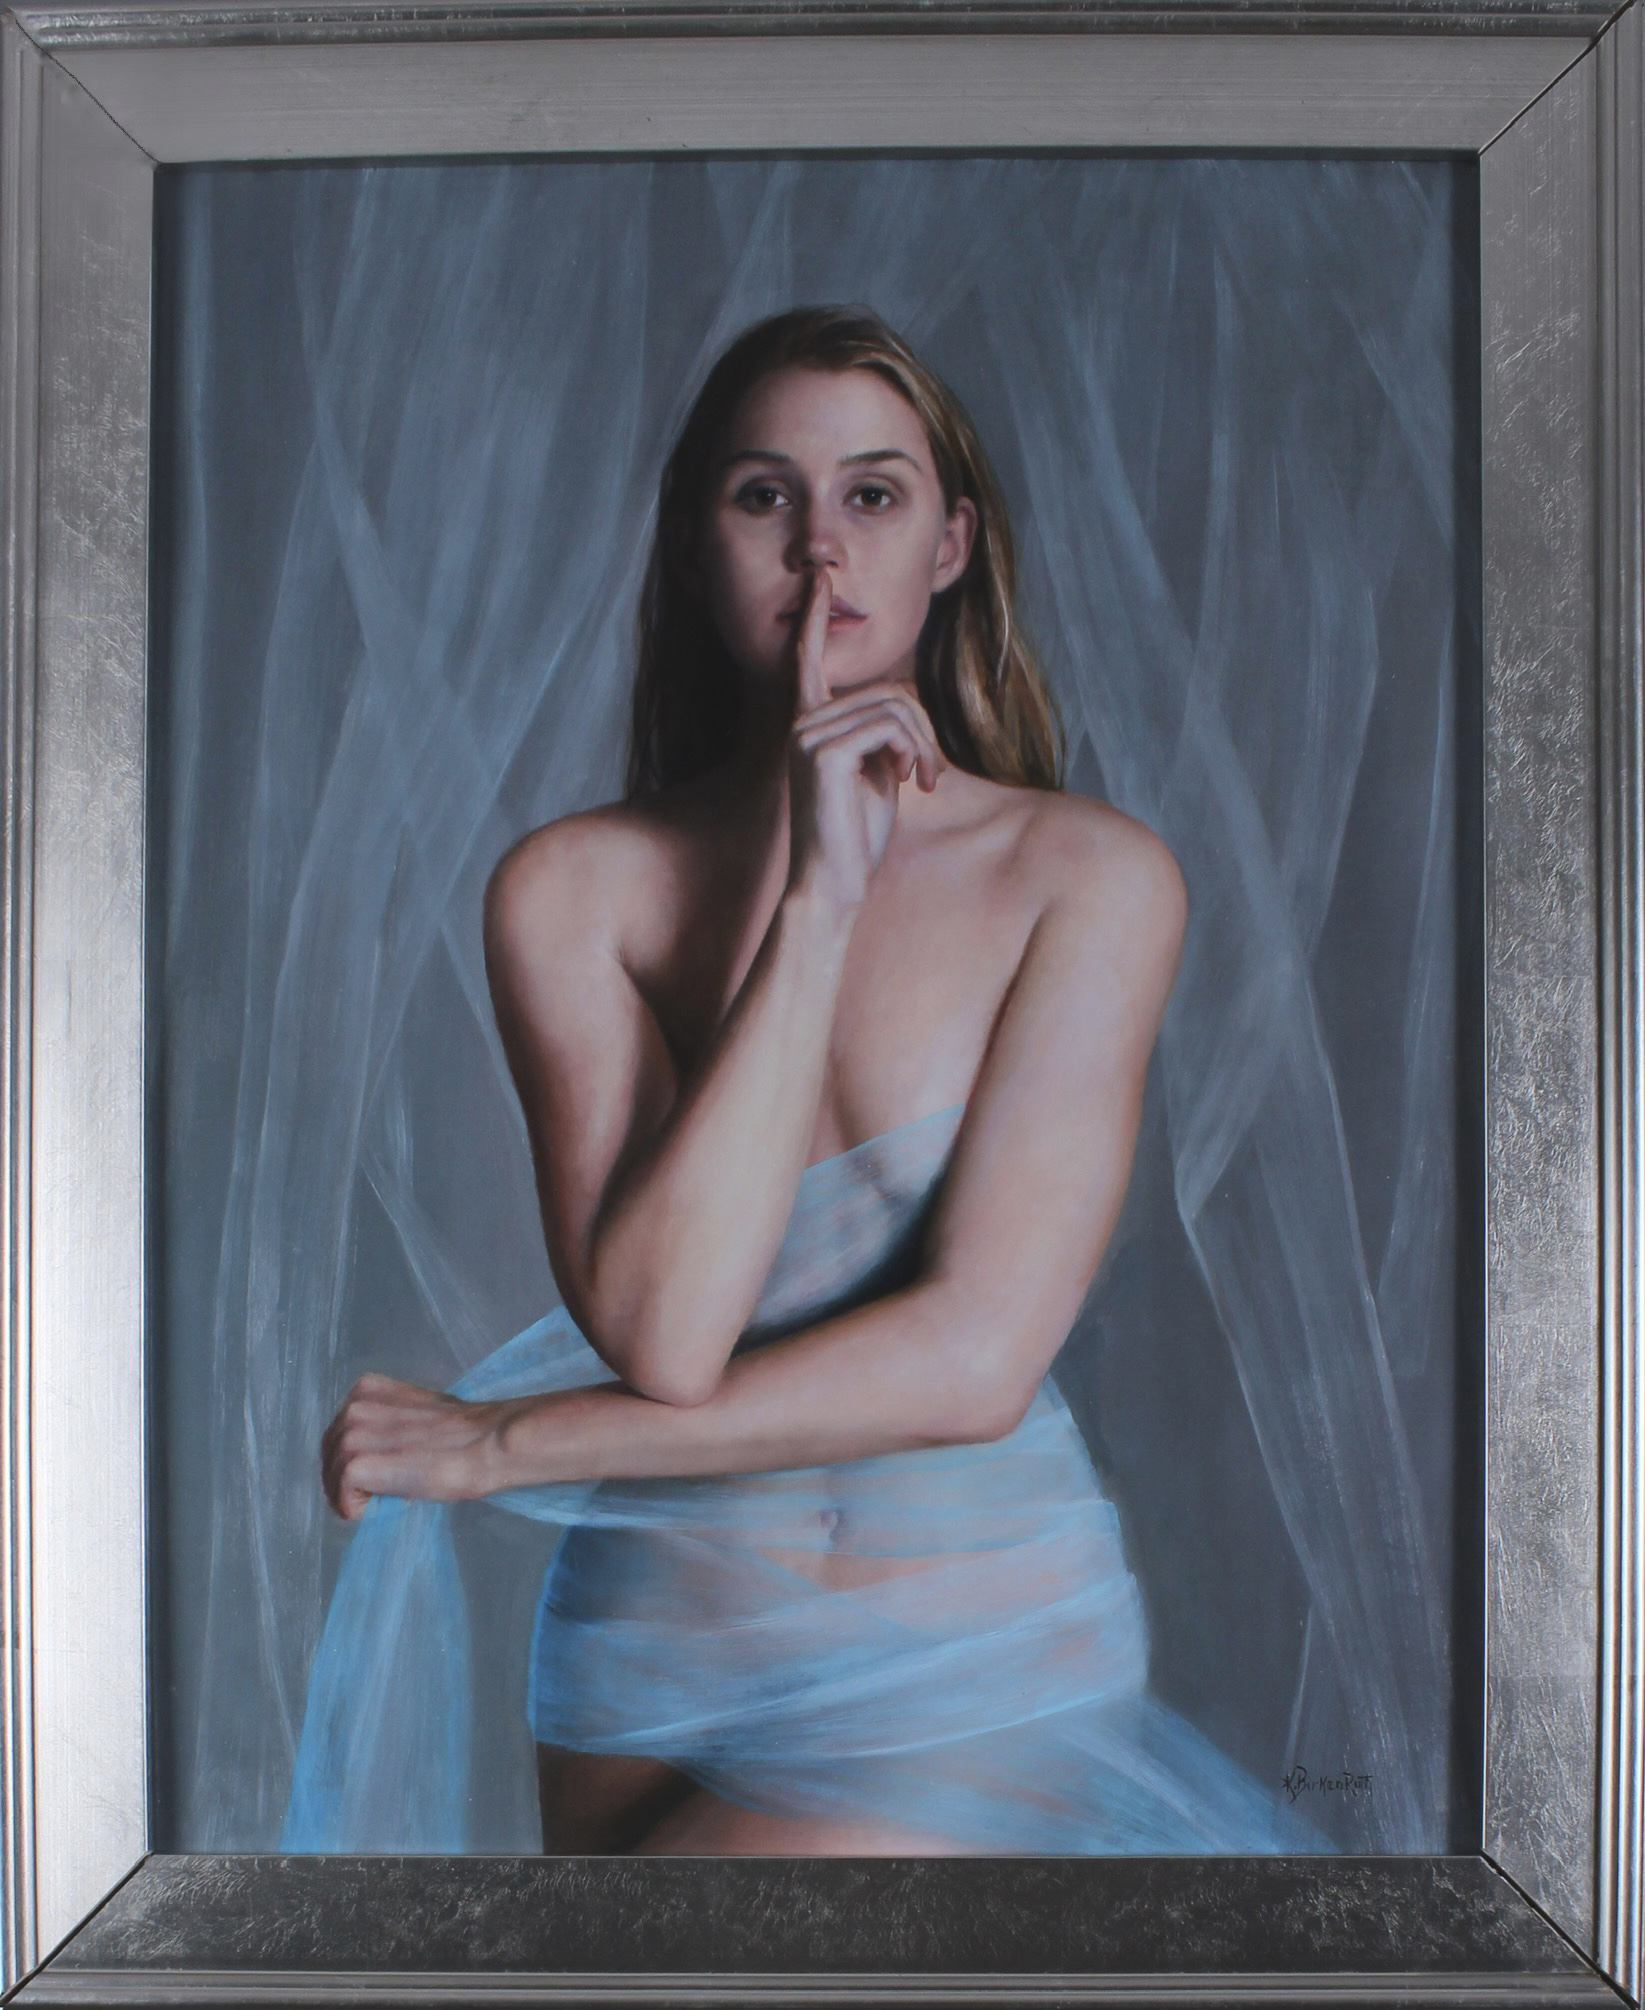 "Wrapped in secrets" in a gray, metallic frame.